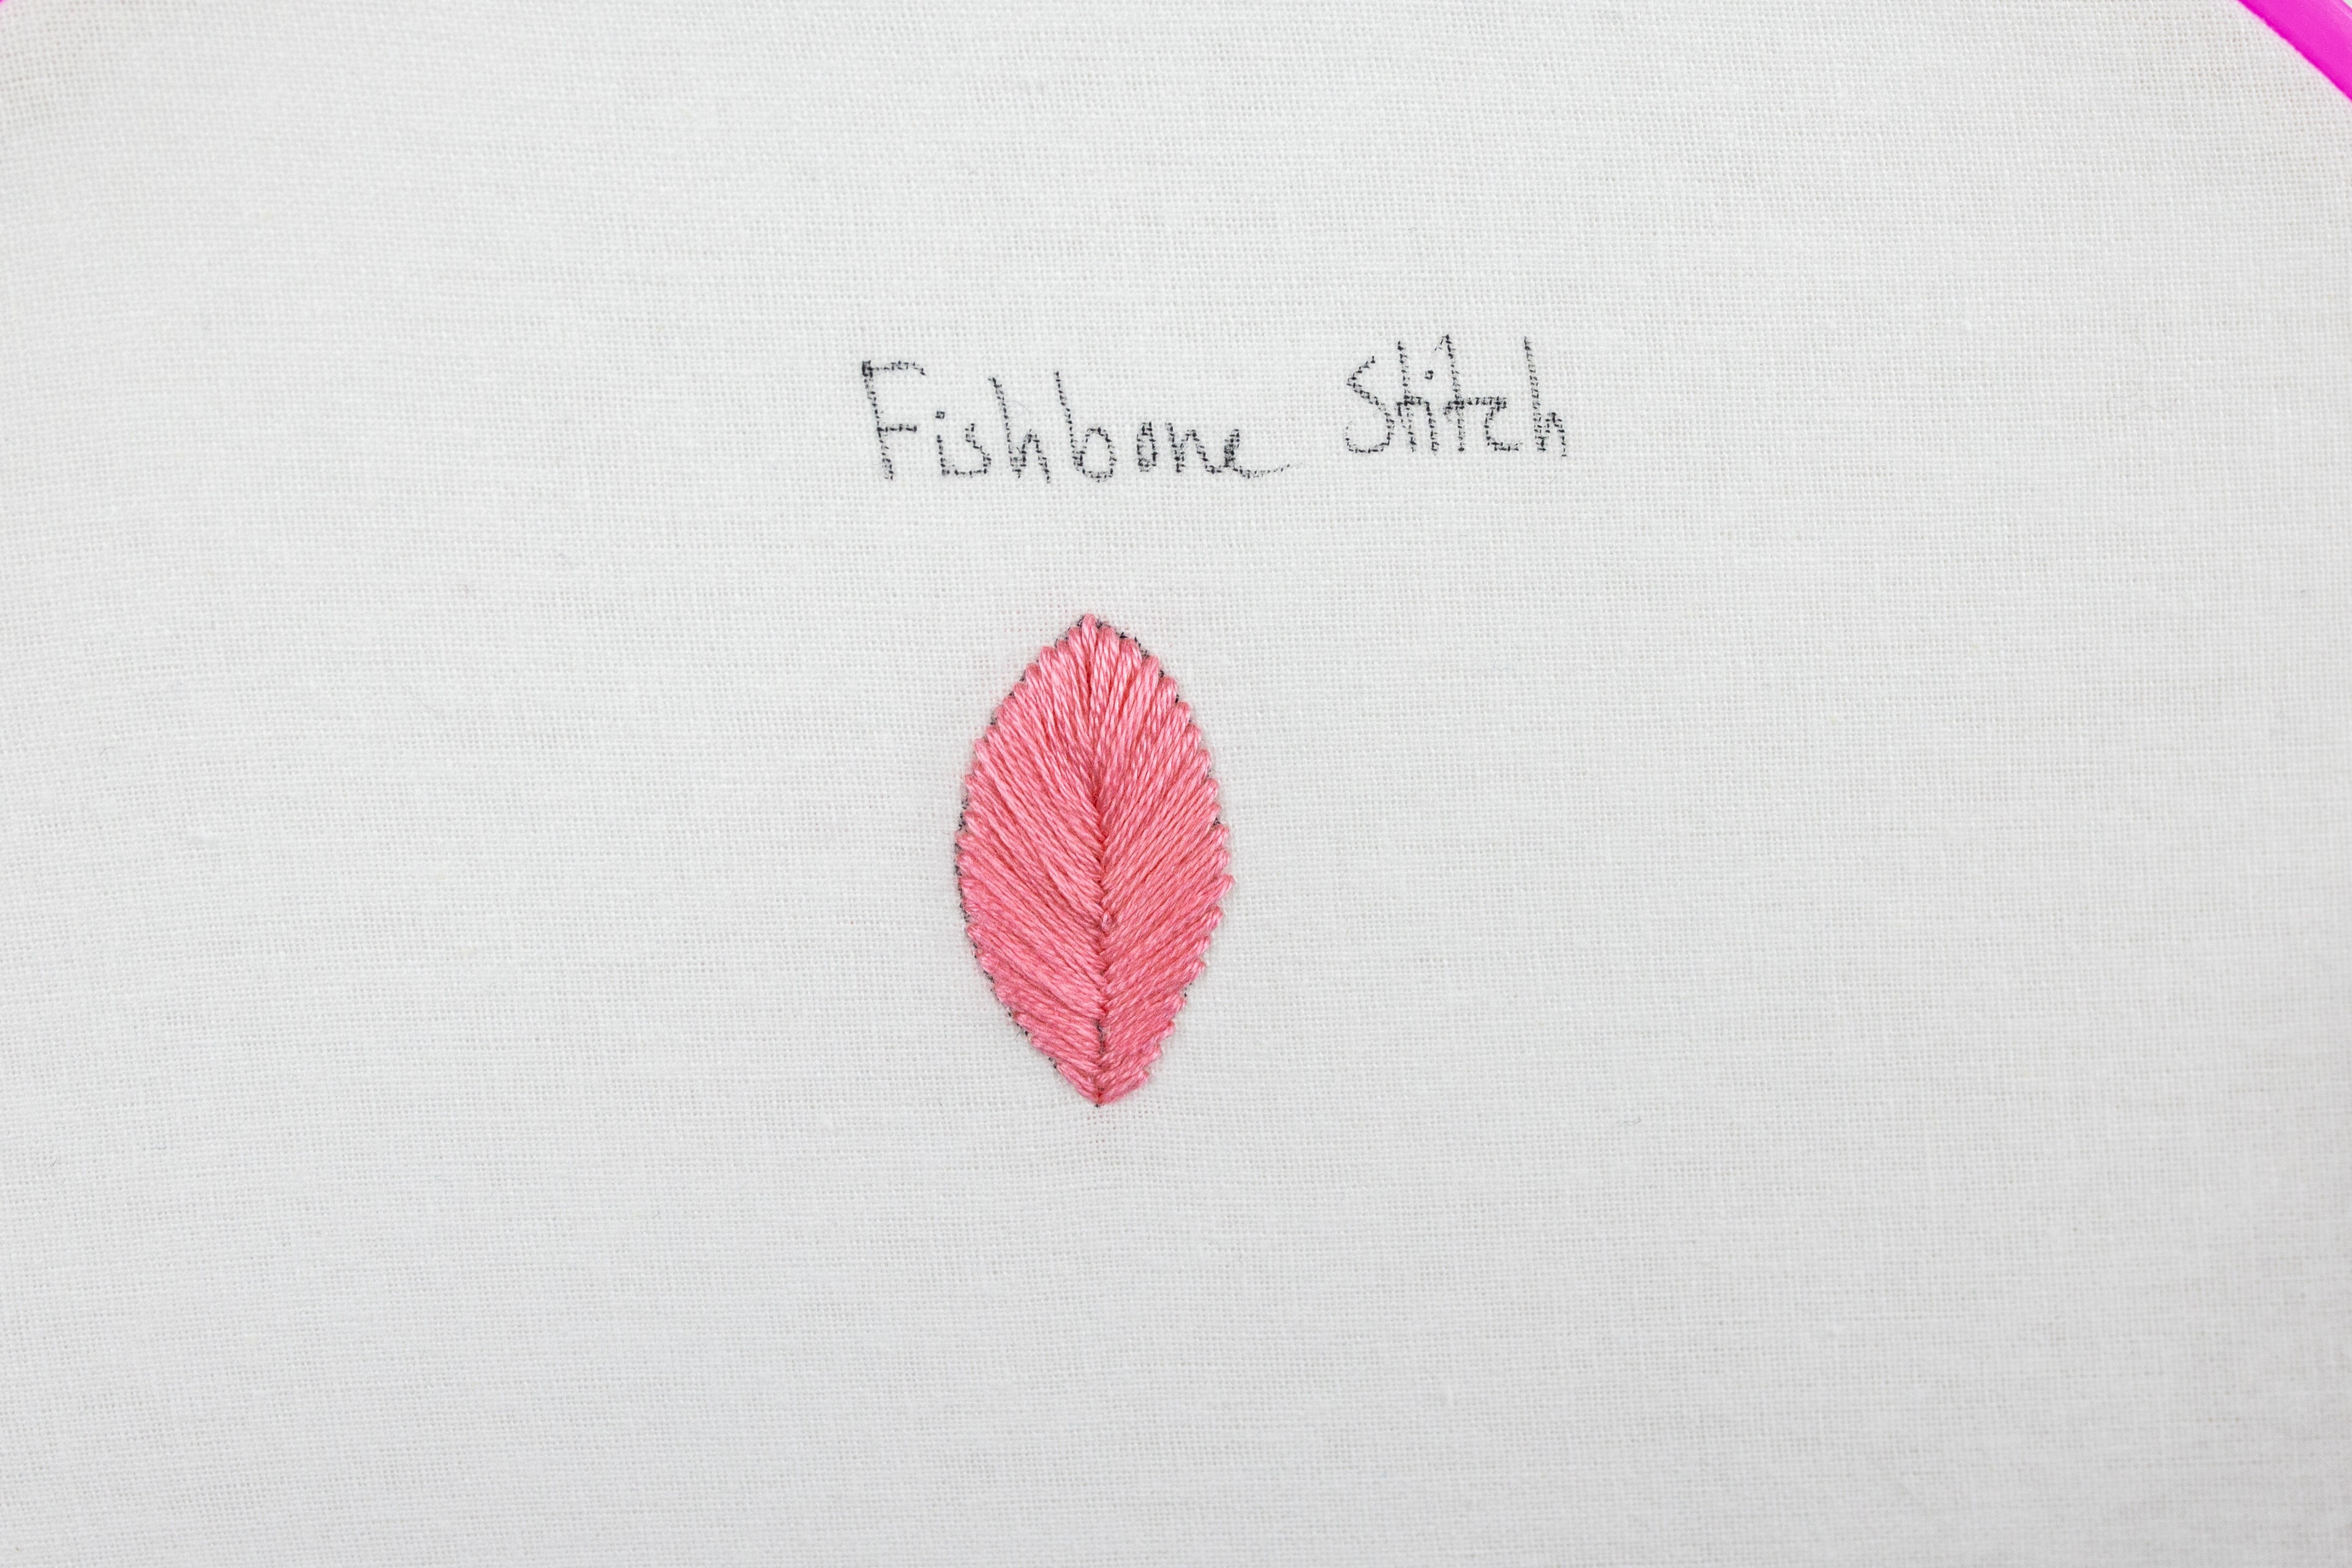 This is an image of a completed leaf made using fishbone stitch.